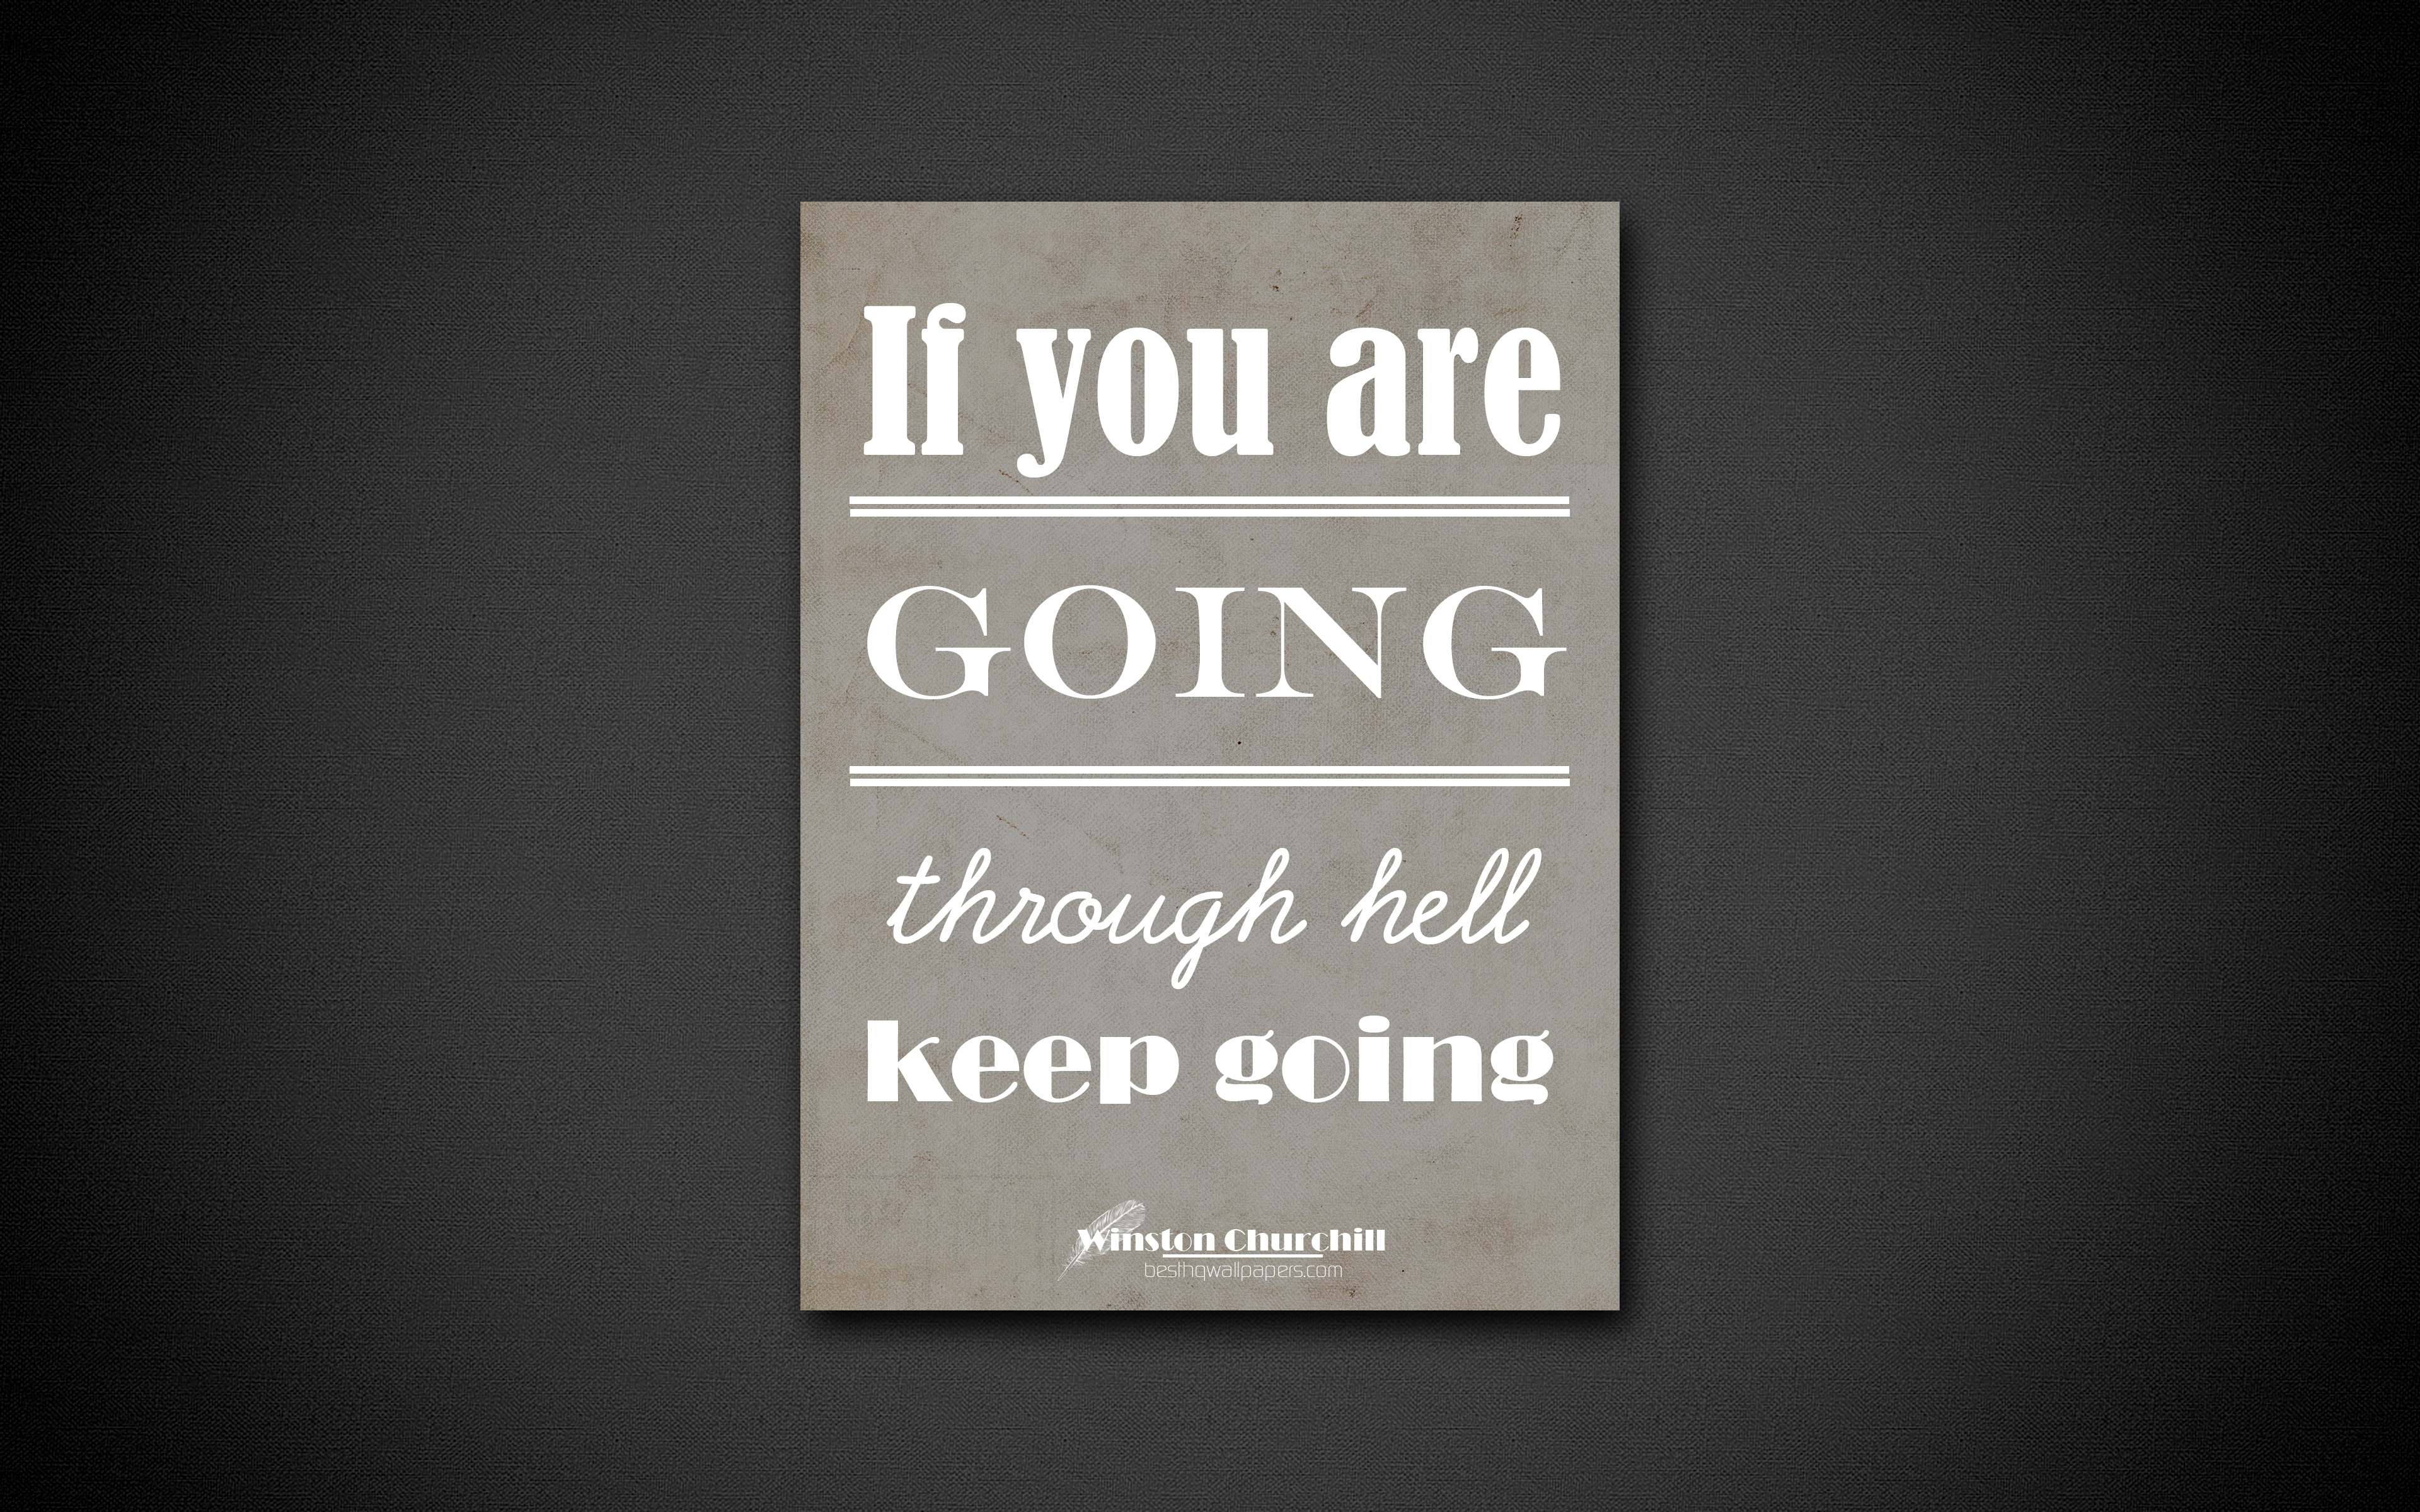 4k, If You Are Going Through Hell Keep Going, Quotes - Diamond Paris - HD Wallpaper 